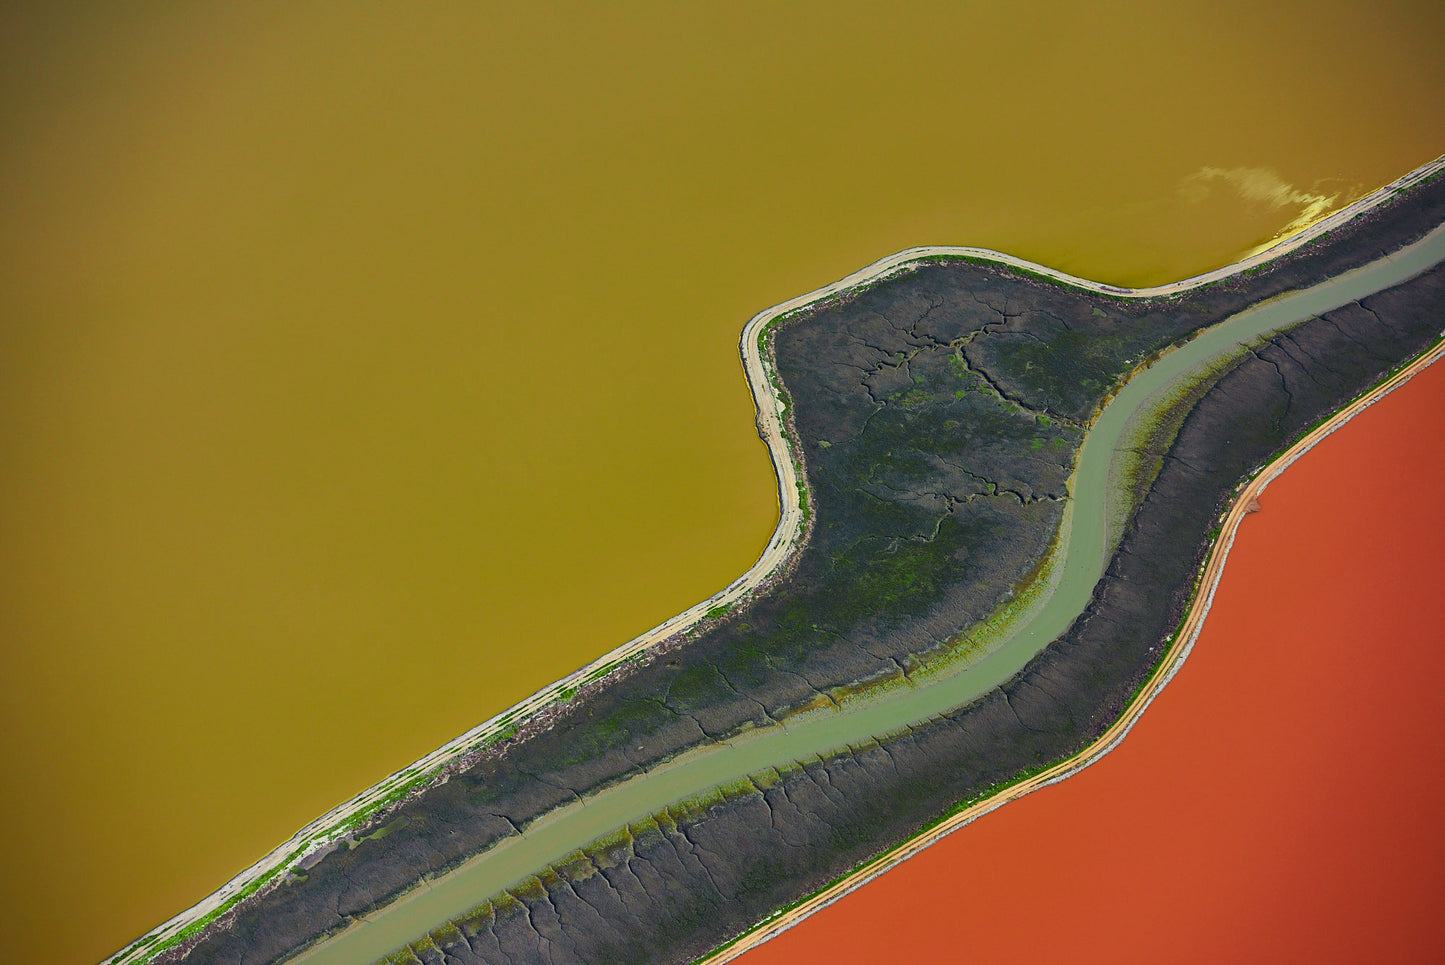 Aerial photography from a doorless R22 helicopter over the San Francisco Bay Cargill Salt Ponds. Limited & open edition fine art prints available for purchase. 